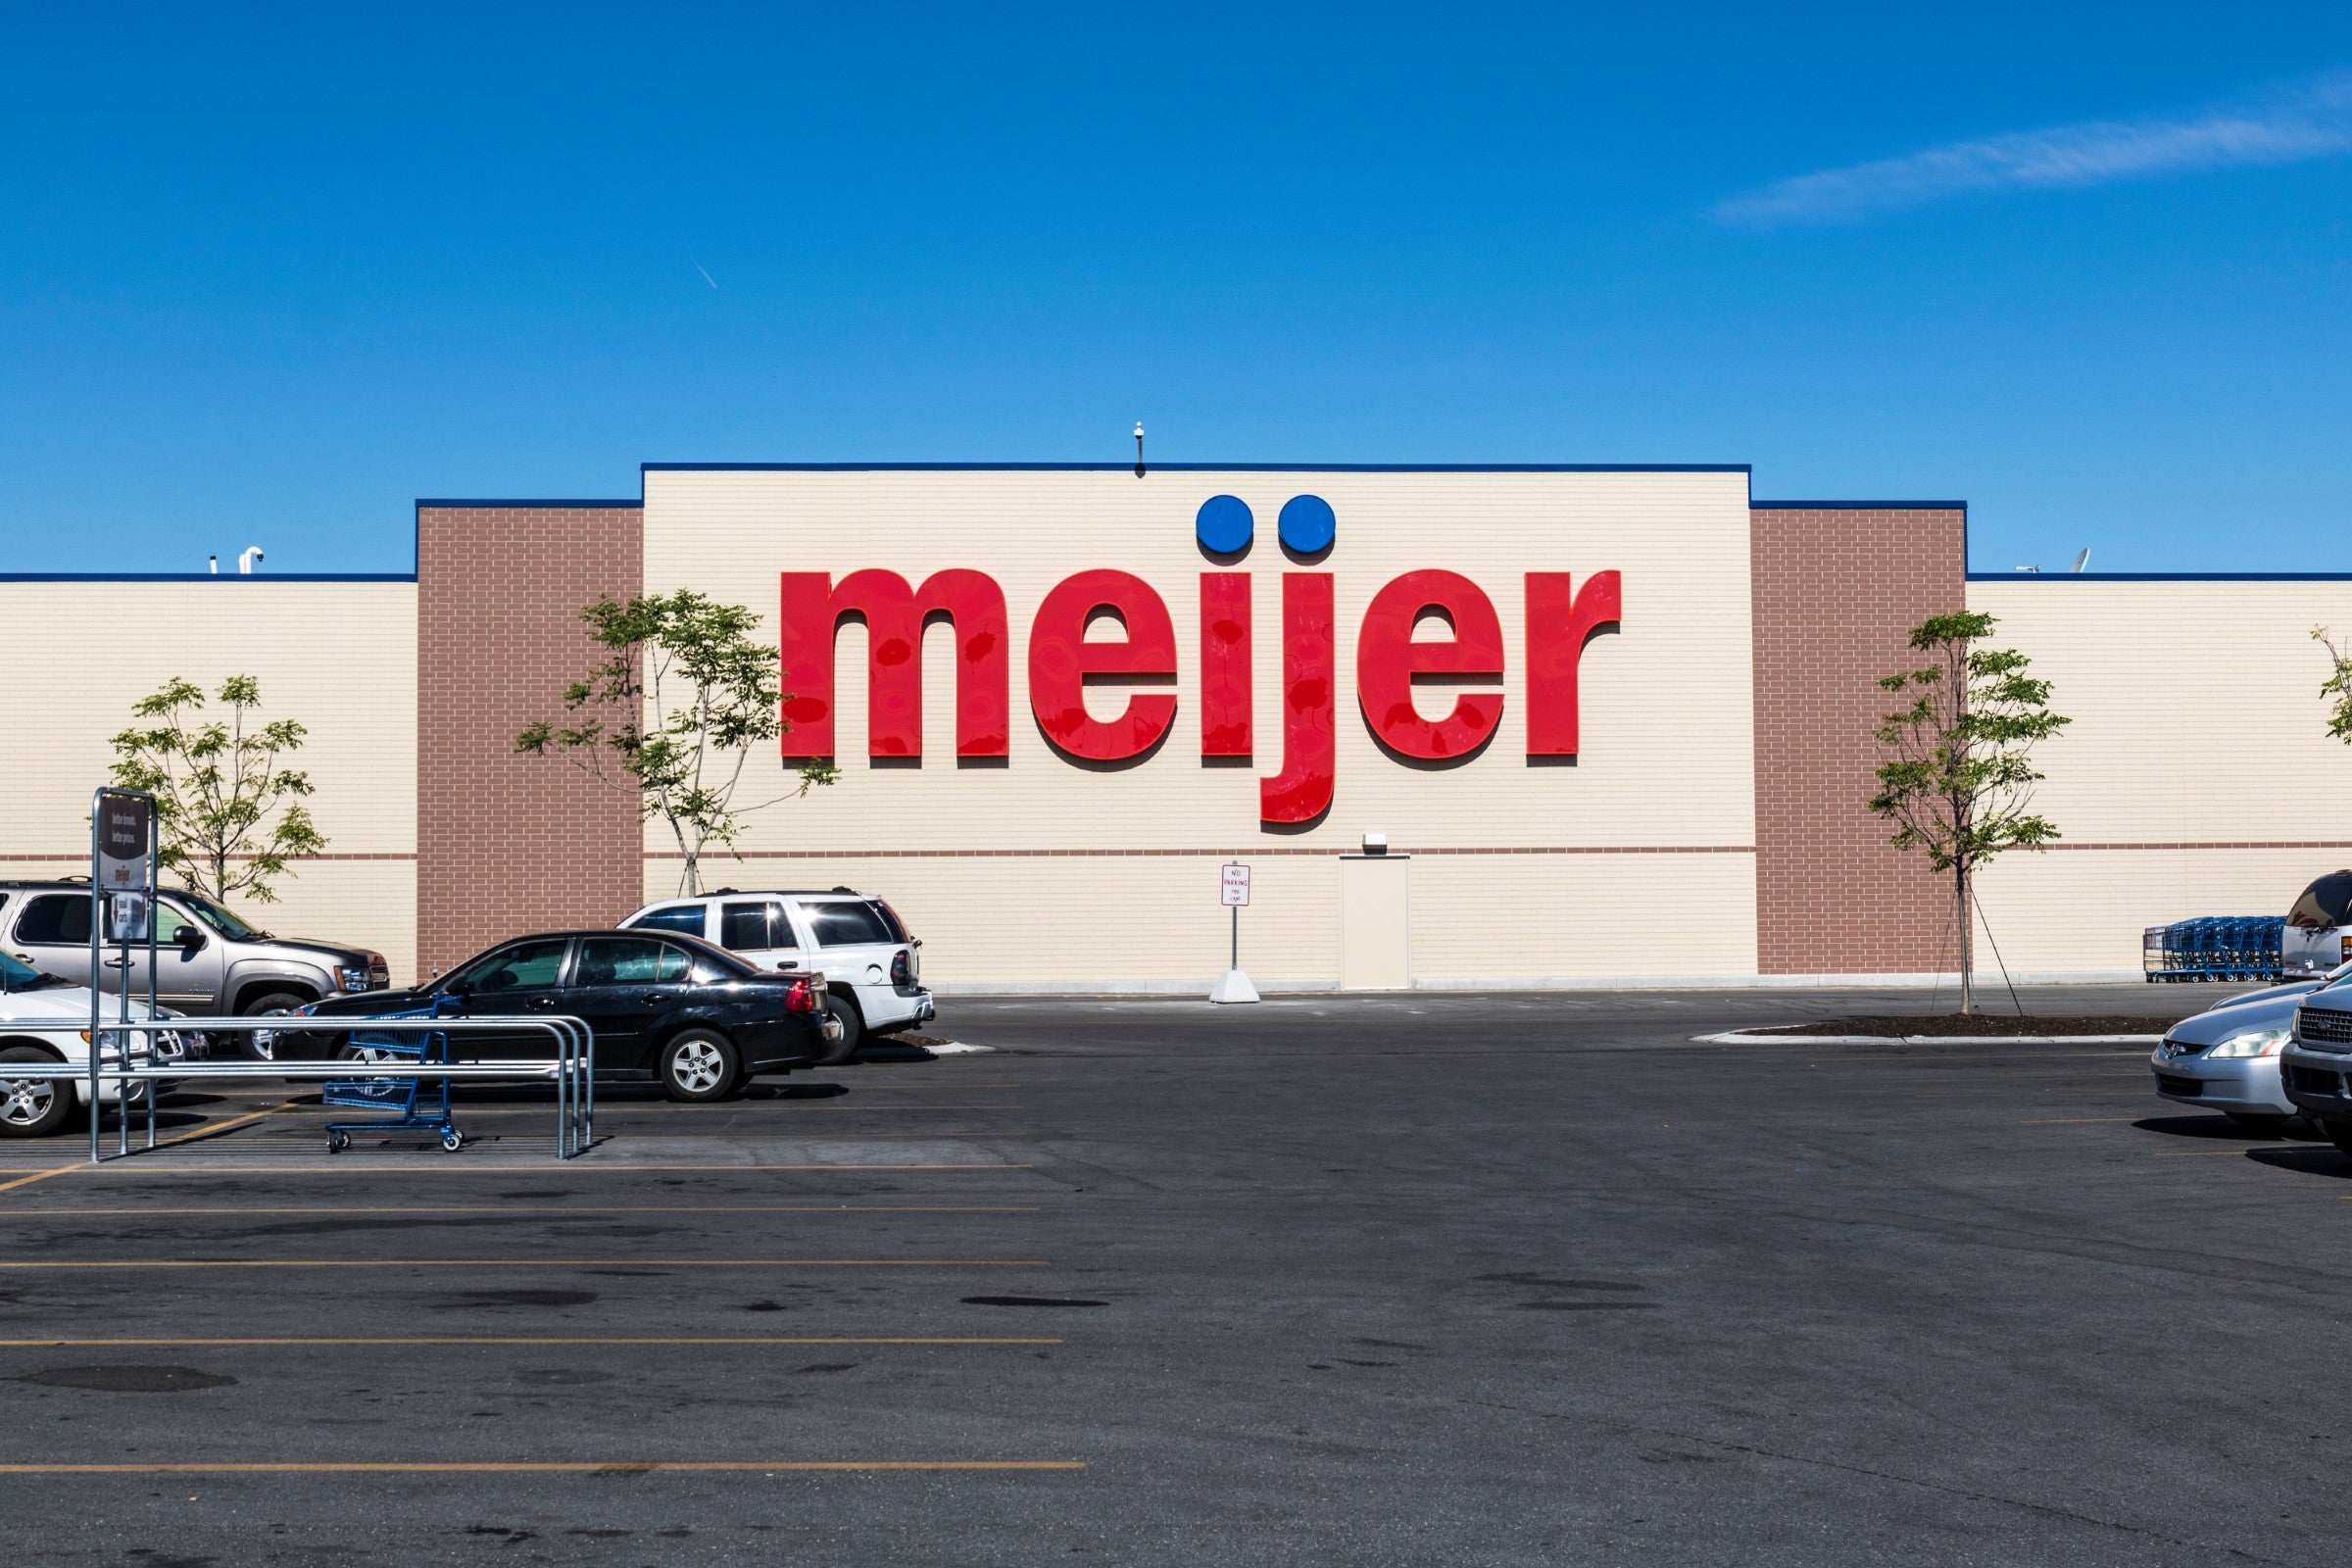 What Deals Can You Get Shopping at Meijer?